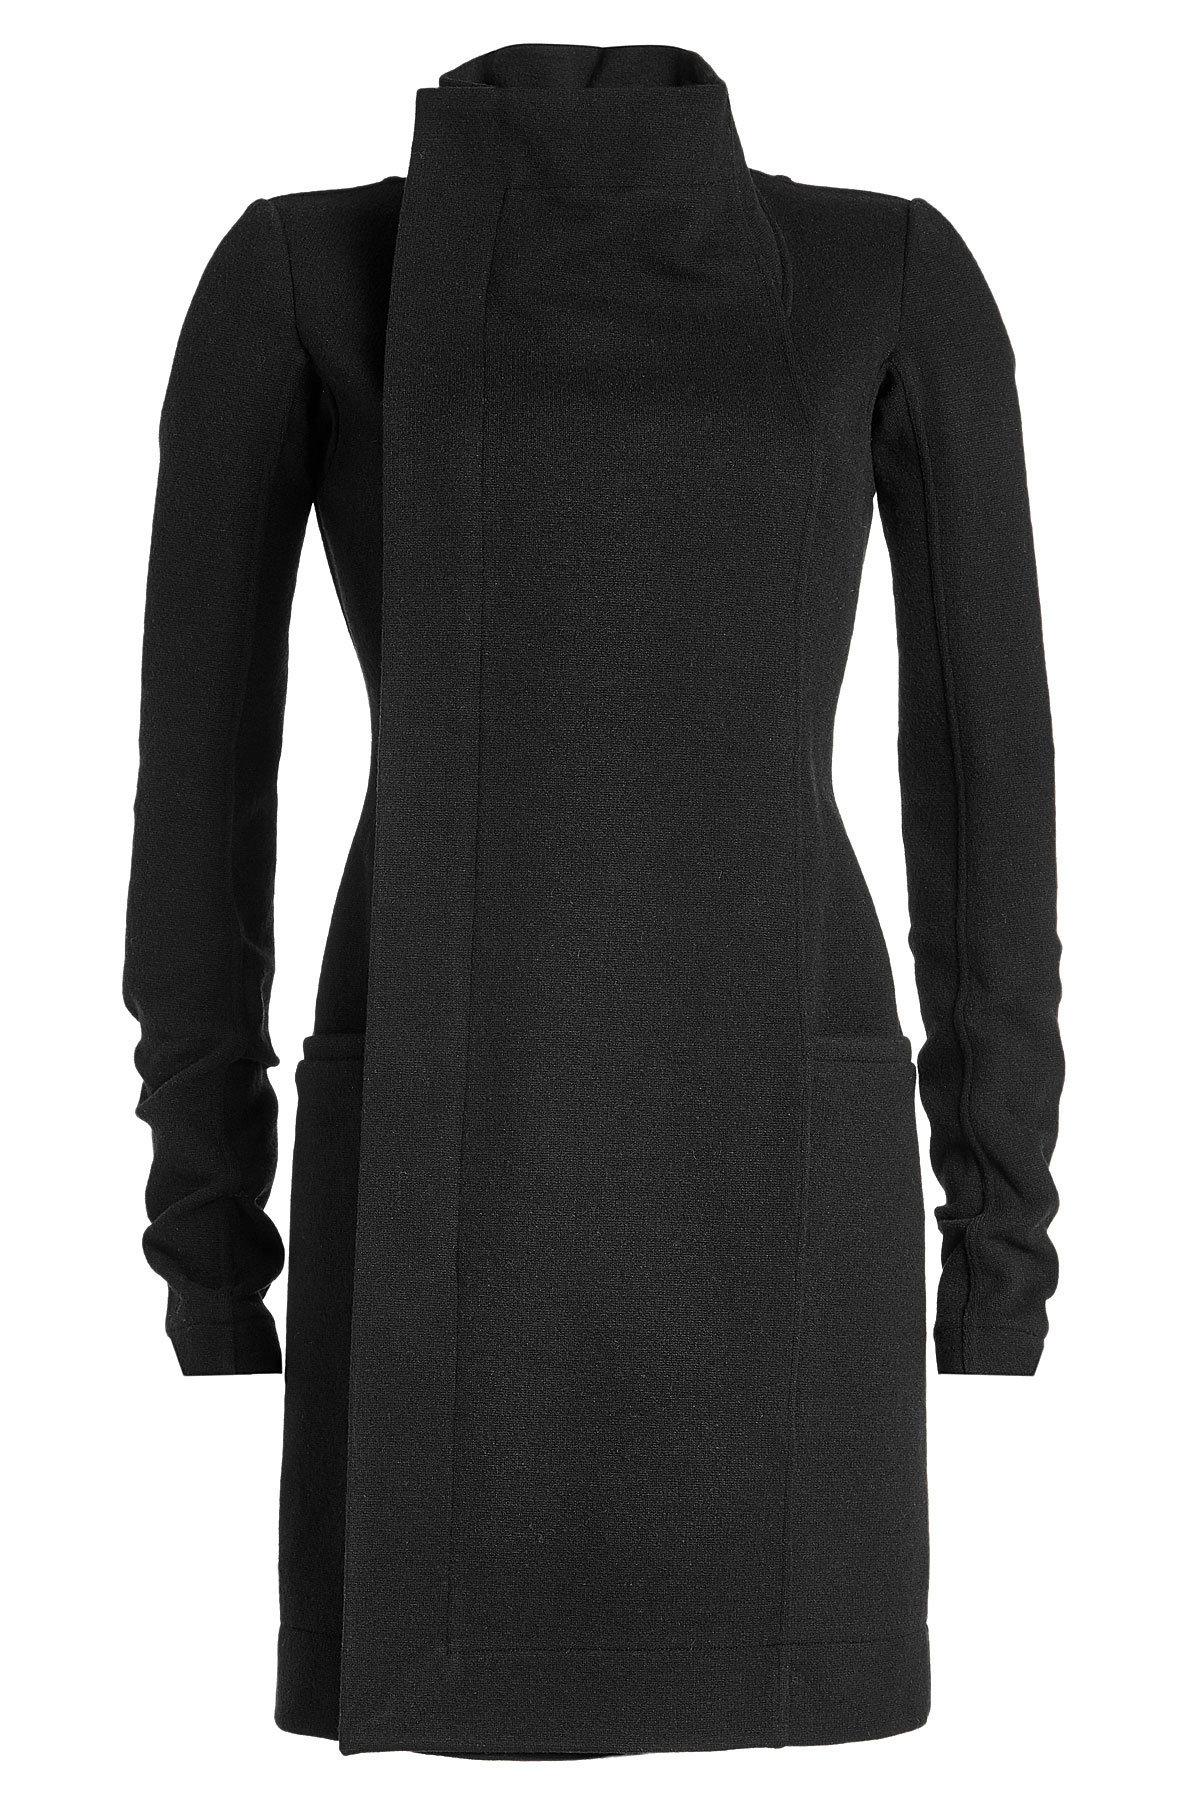 Lyst - Rick Owens Coat With Wool in Black